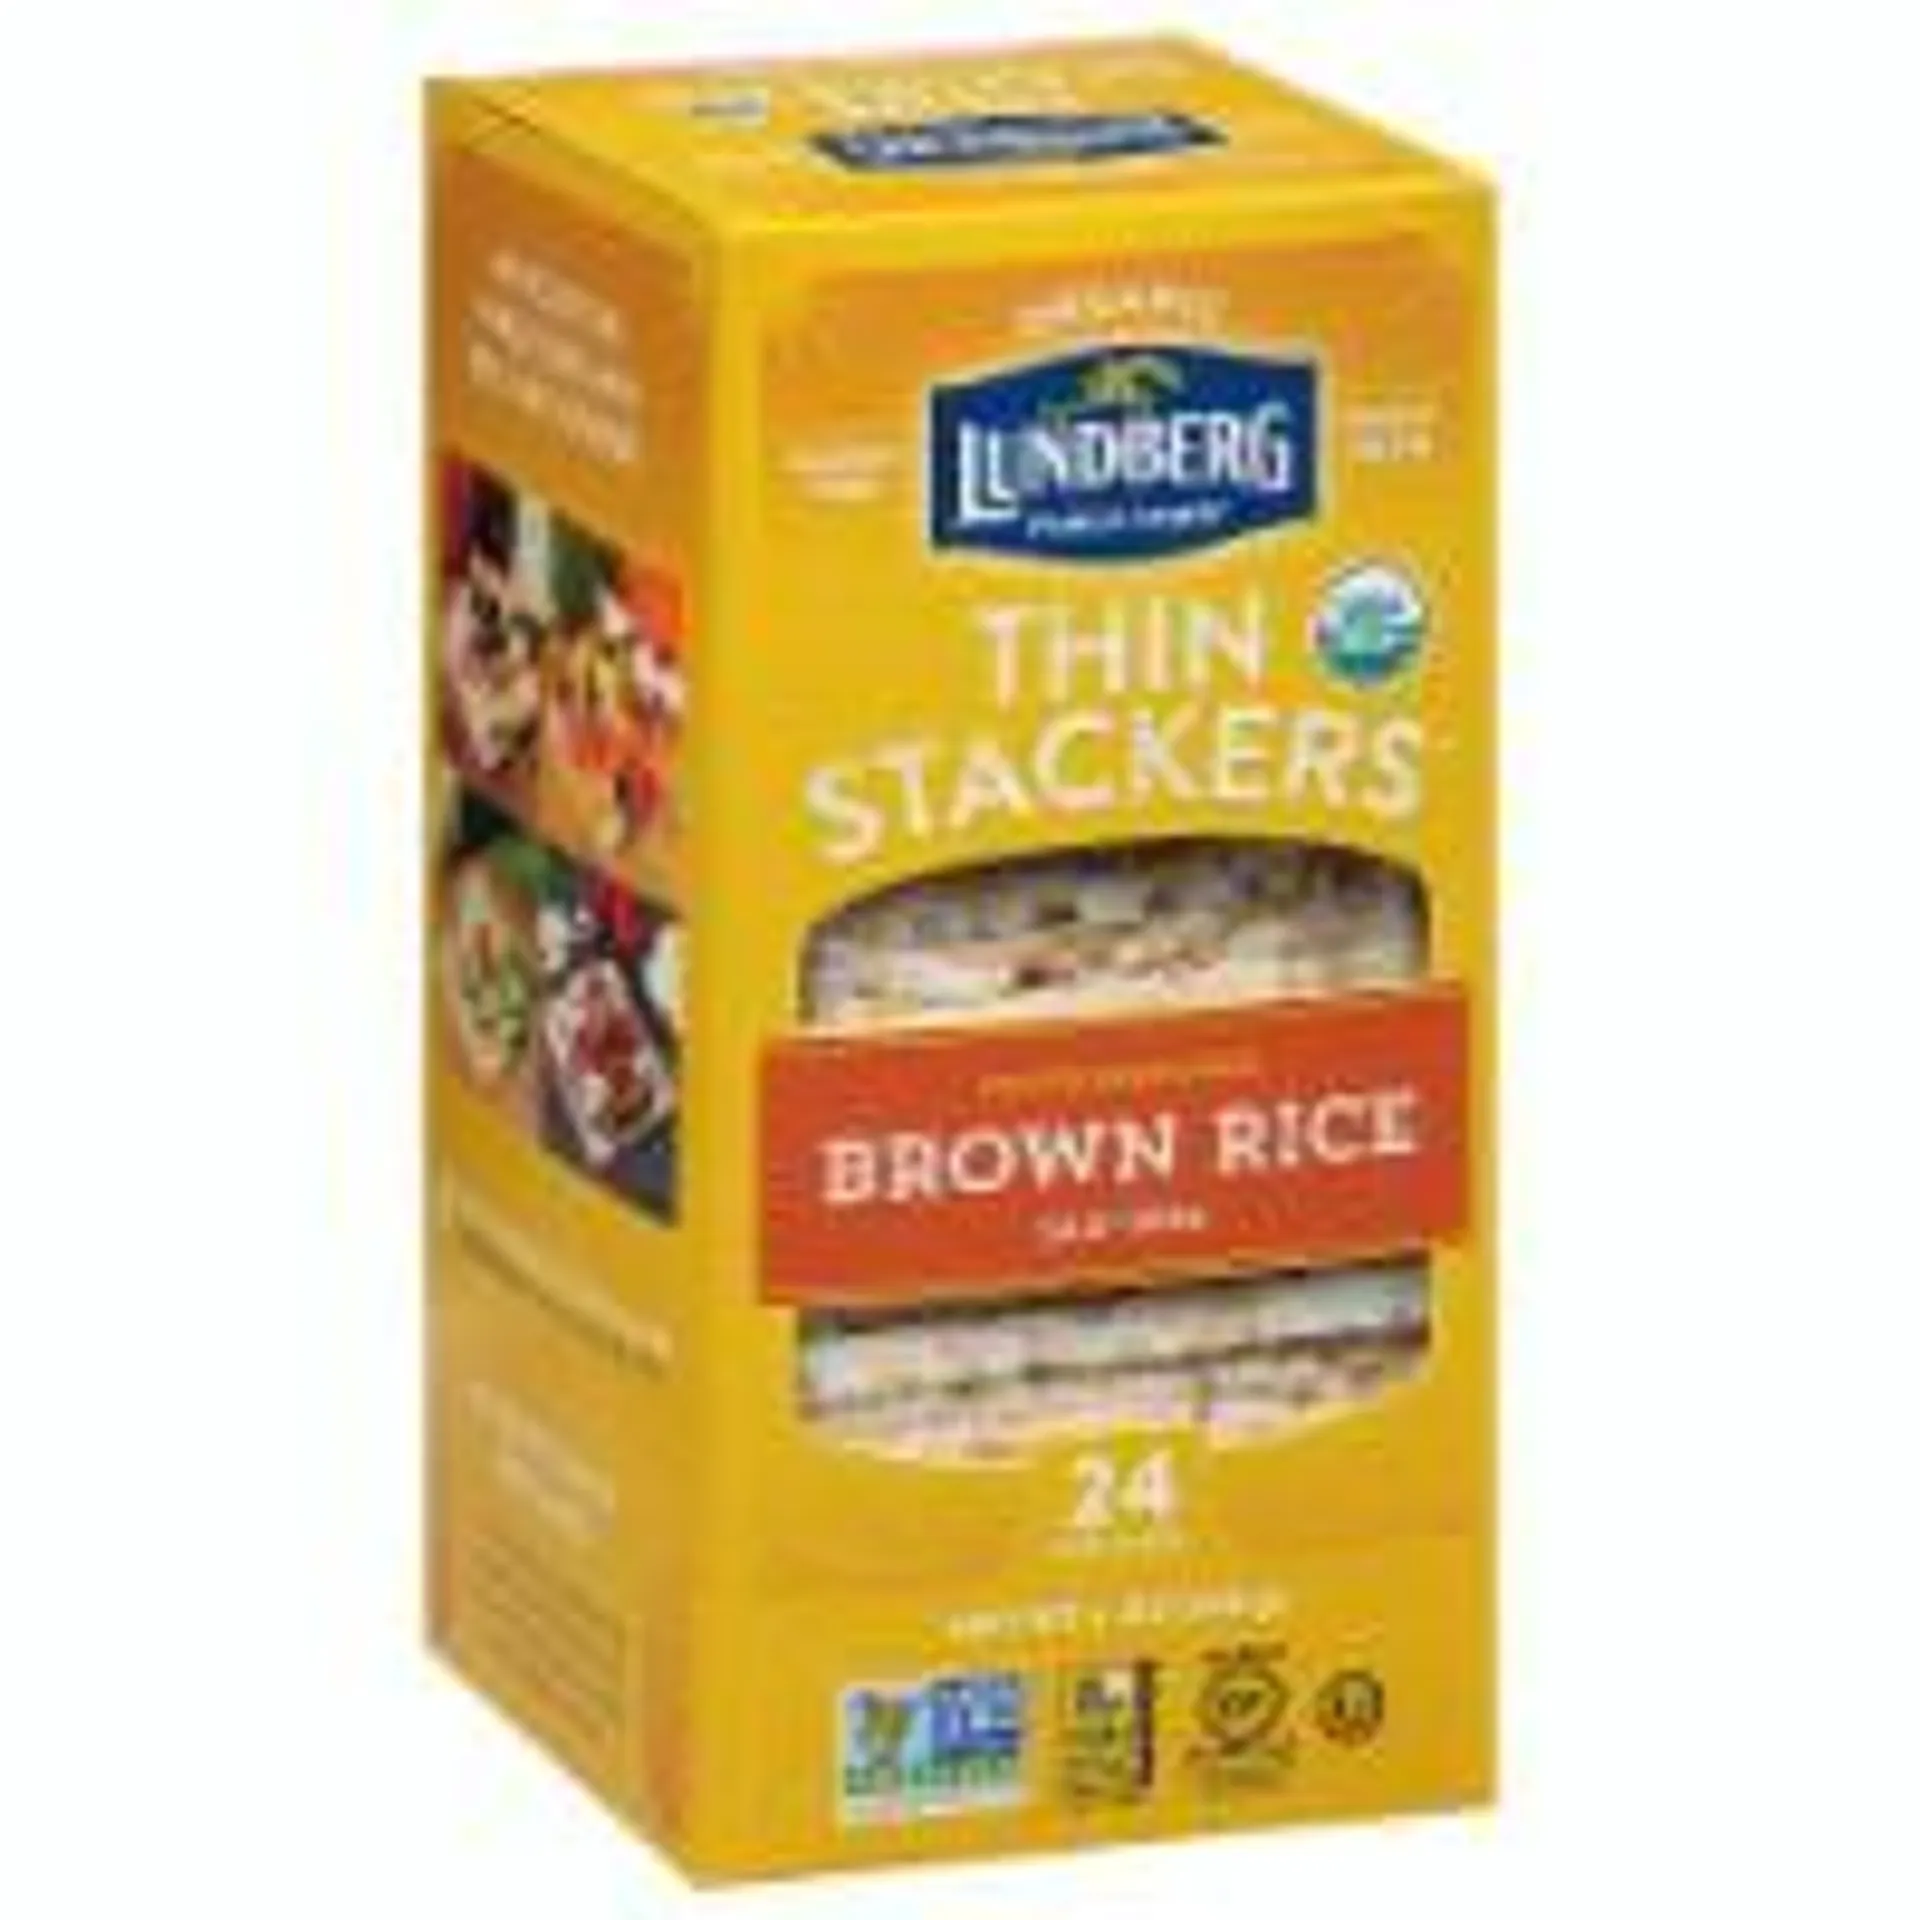 Lundberg Thin Stackers Brown Rice Organic 6 oz (Pack of 6)